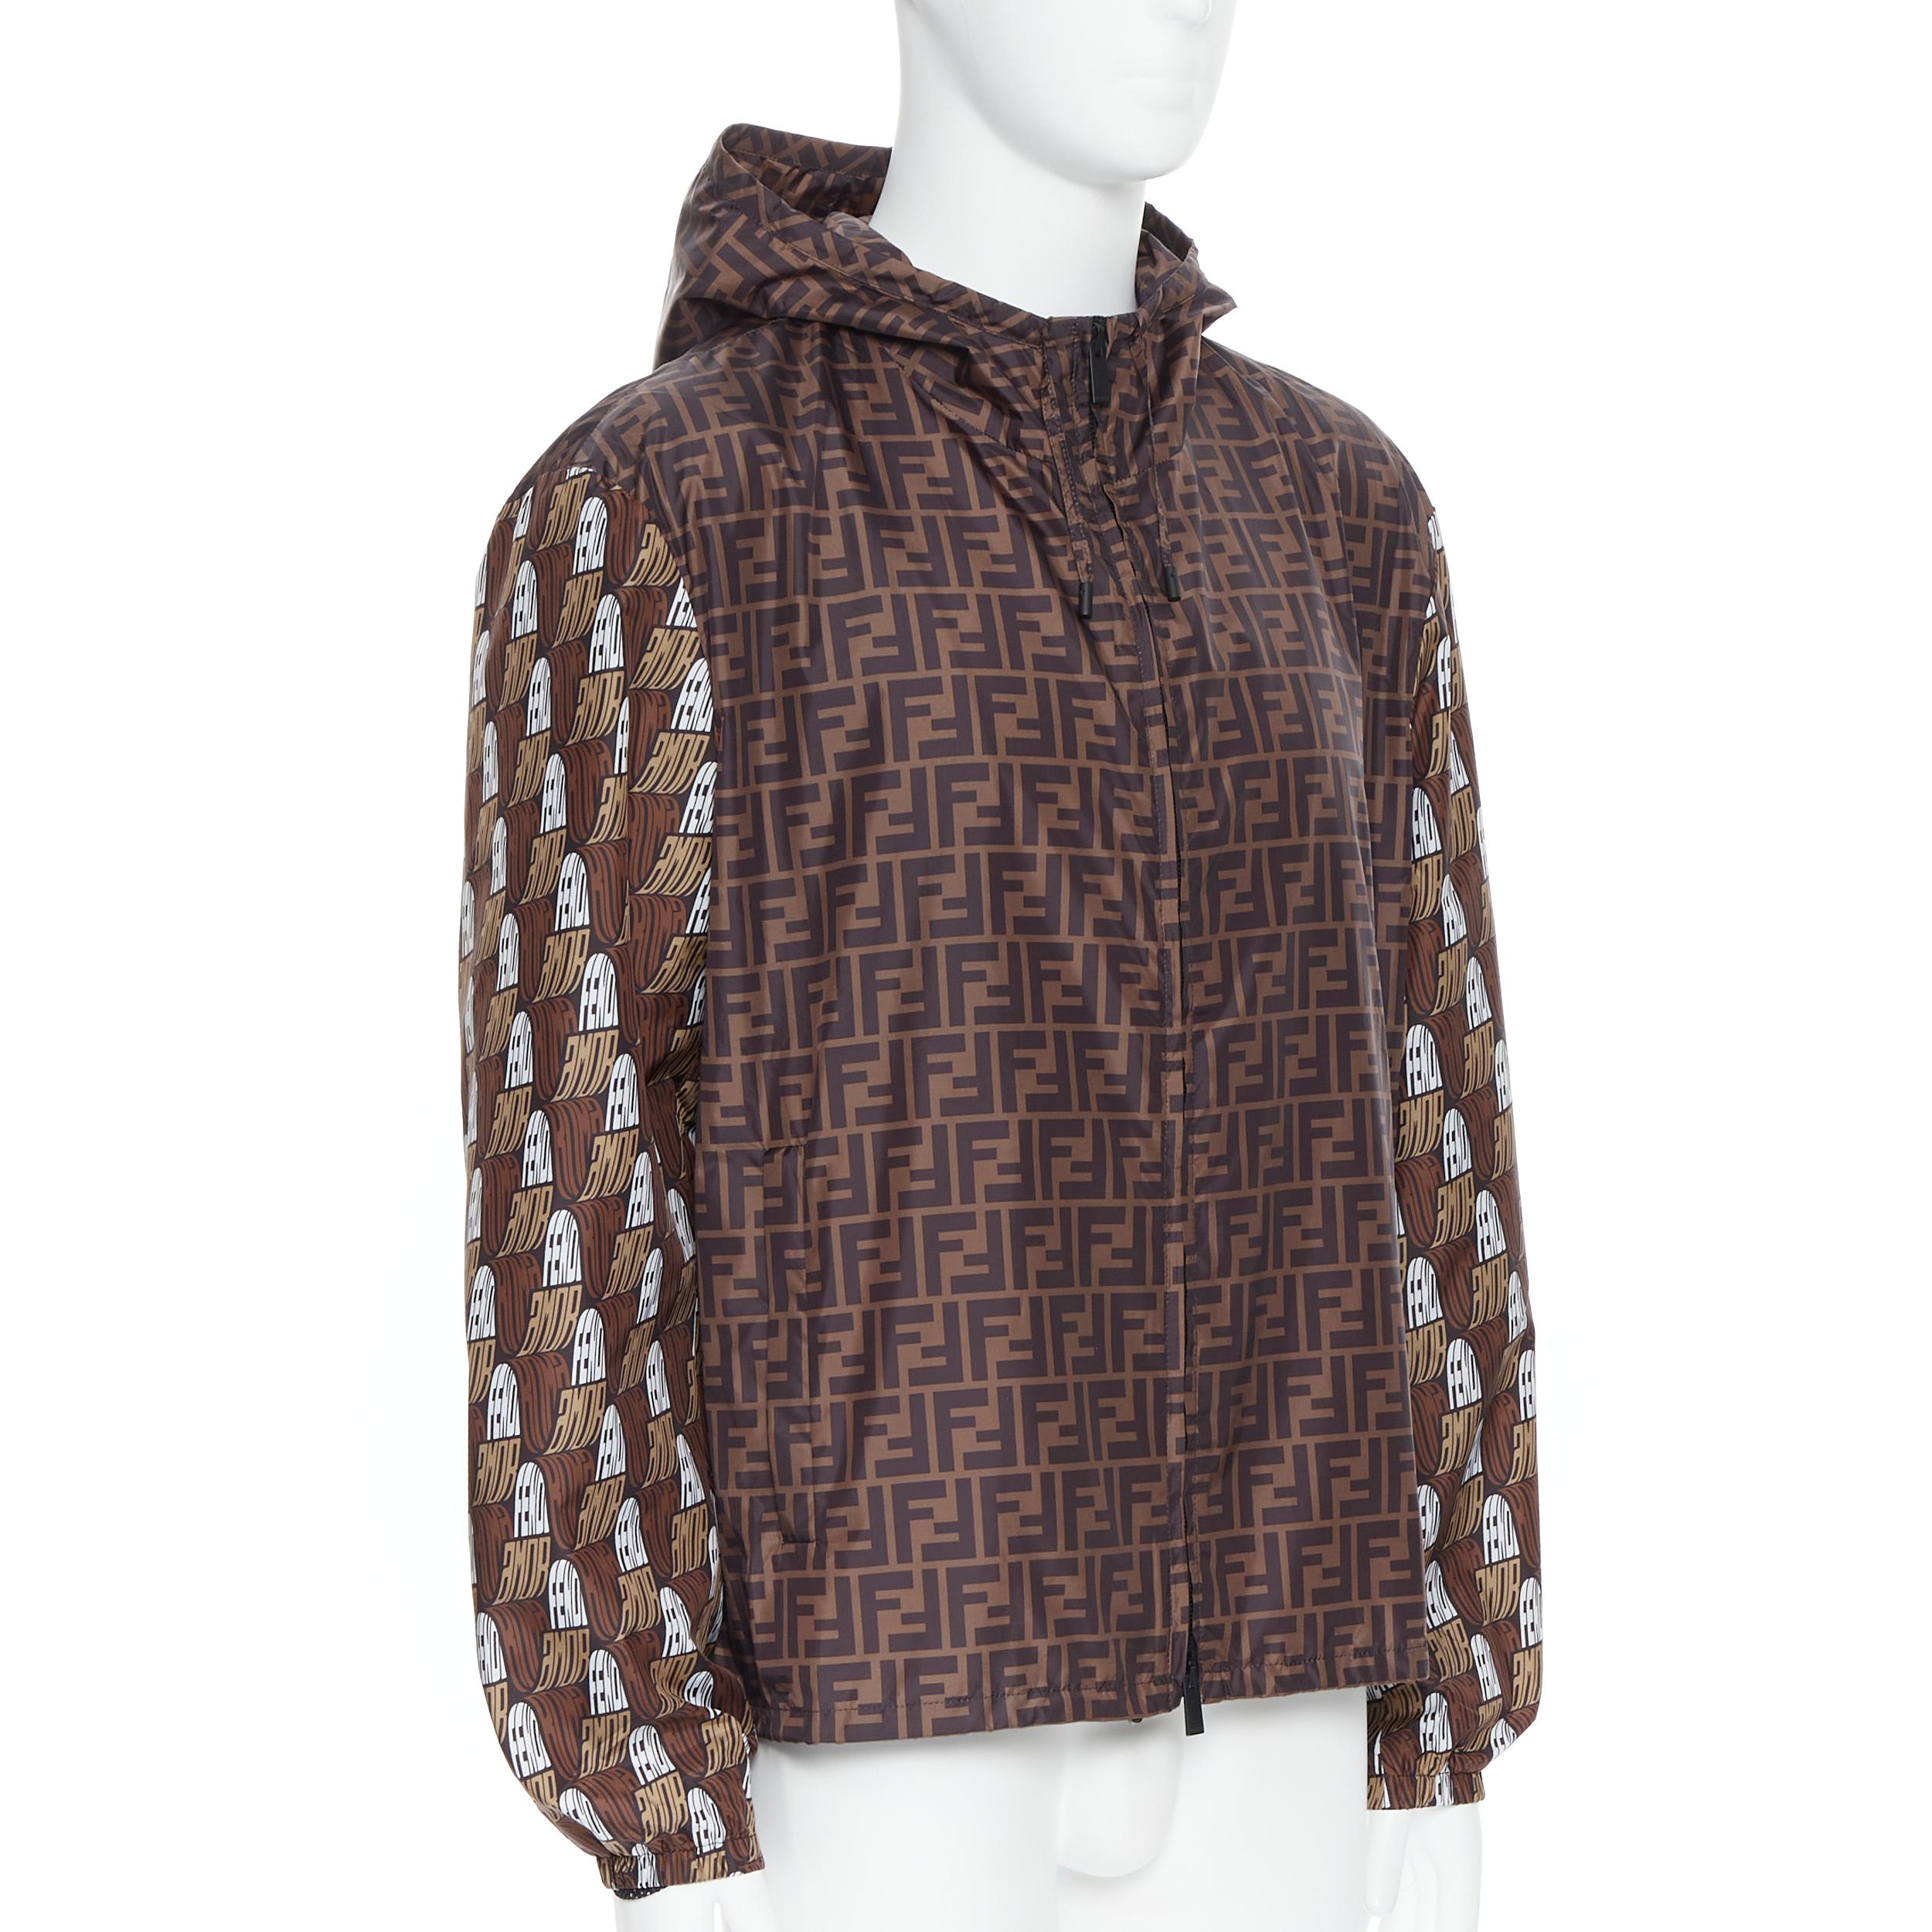 new FENDI Roma Amor Zucca monogram print gold embroidery windbreaker jacket IT52 
Reference: TGAS/B00365 
Brand: Fendi 
Material: Nylon 
Color: Brown 
Pattern: Other 
Closure: Zip 
Extra Detail: Zucca monogram print. Fendi Roma Amor print on both